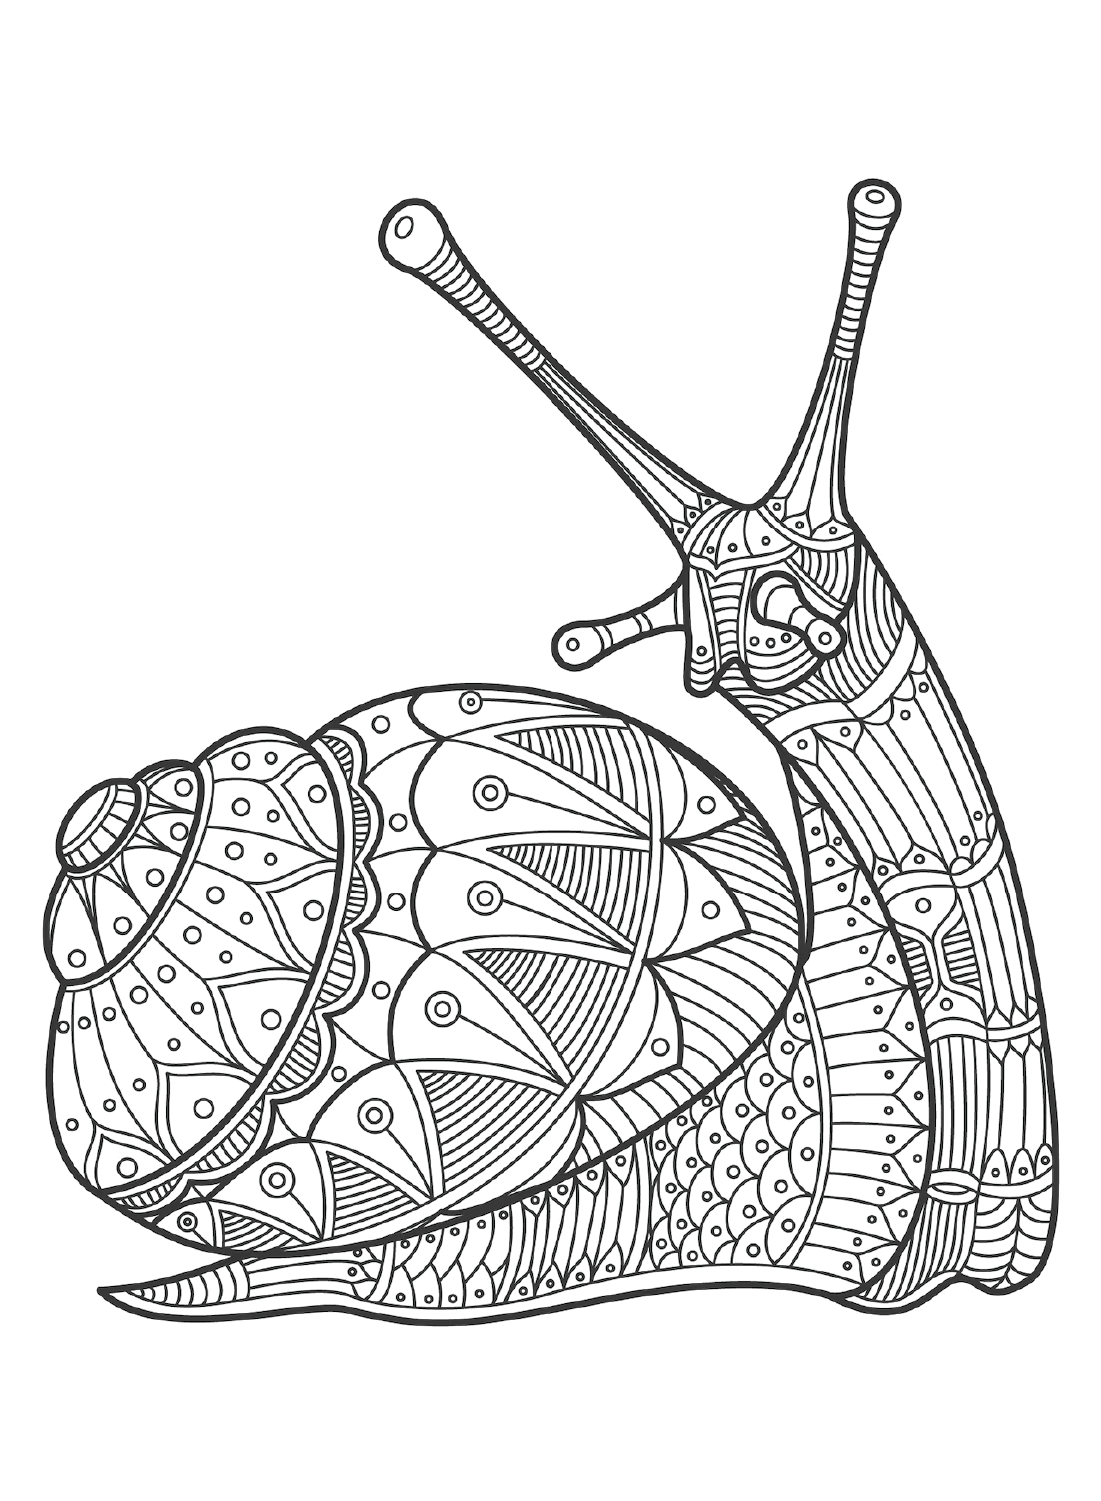 Zentangle Snail Coloring Pages